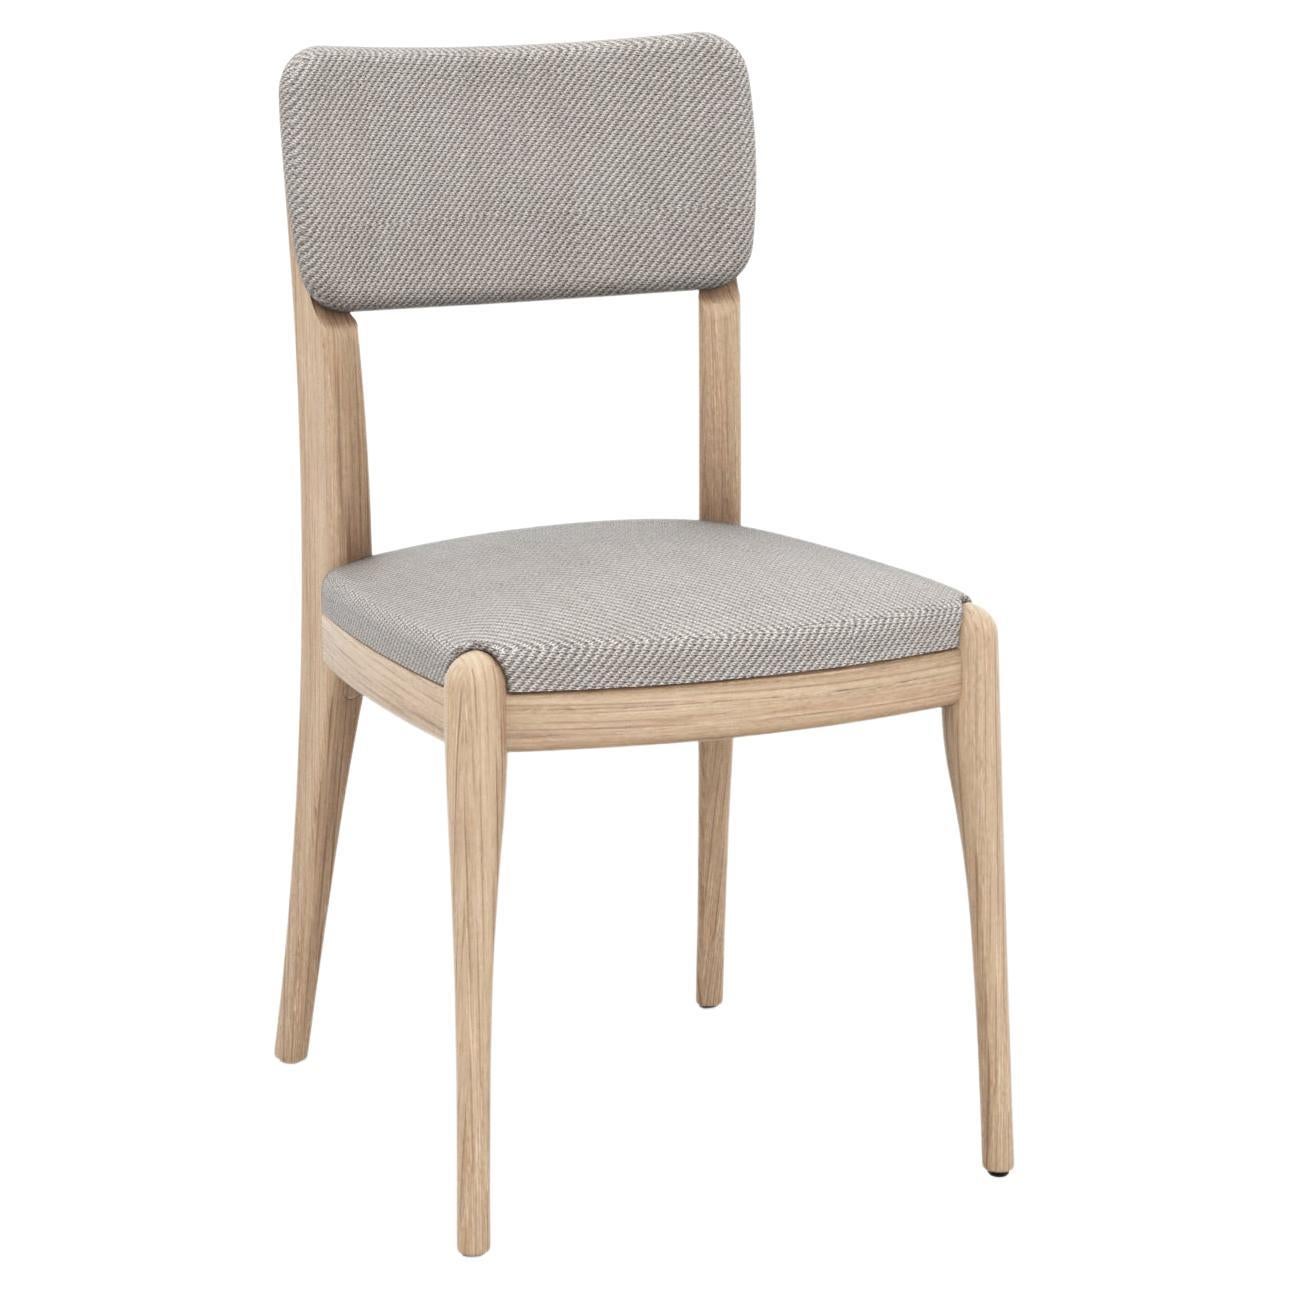 Revised Finchdean – solid oak dining chair